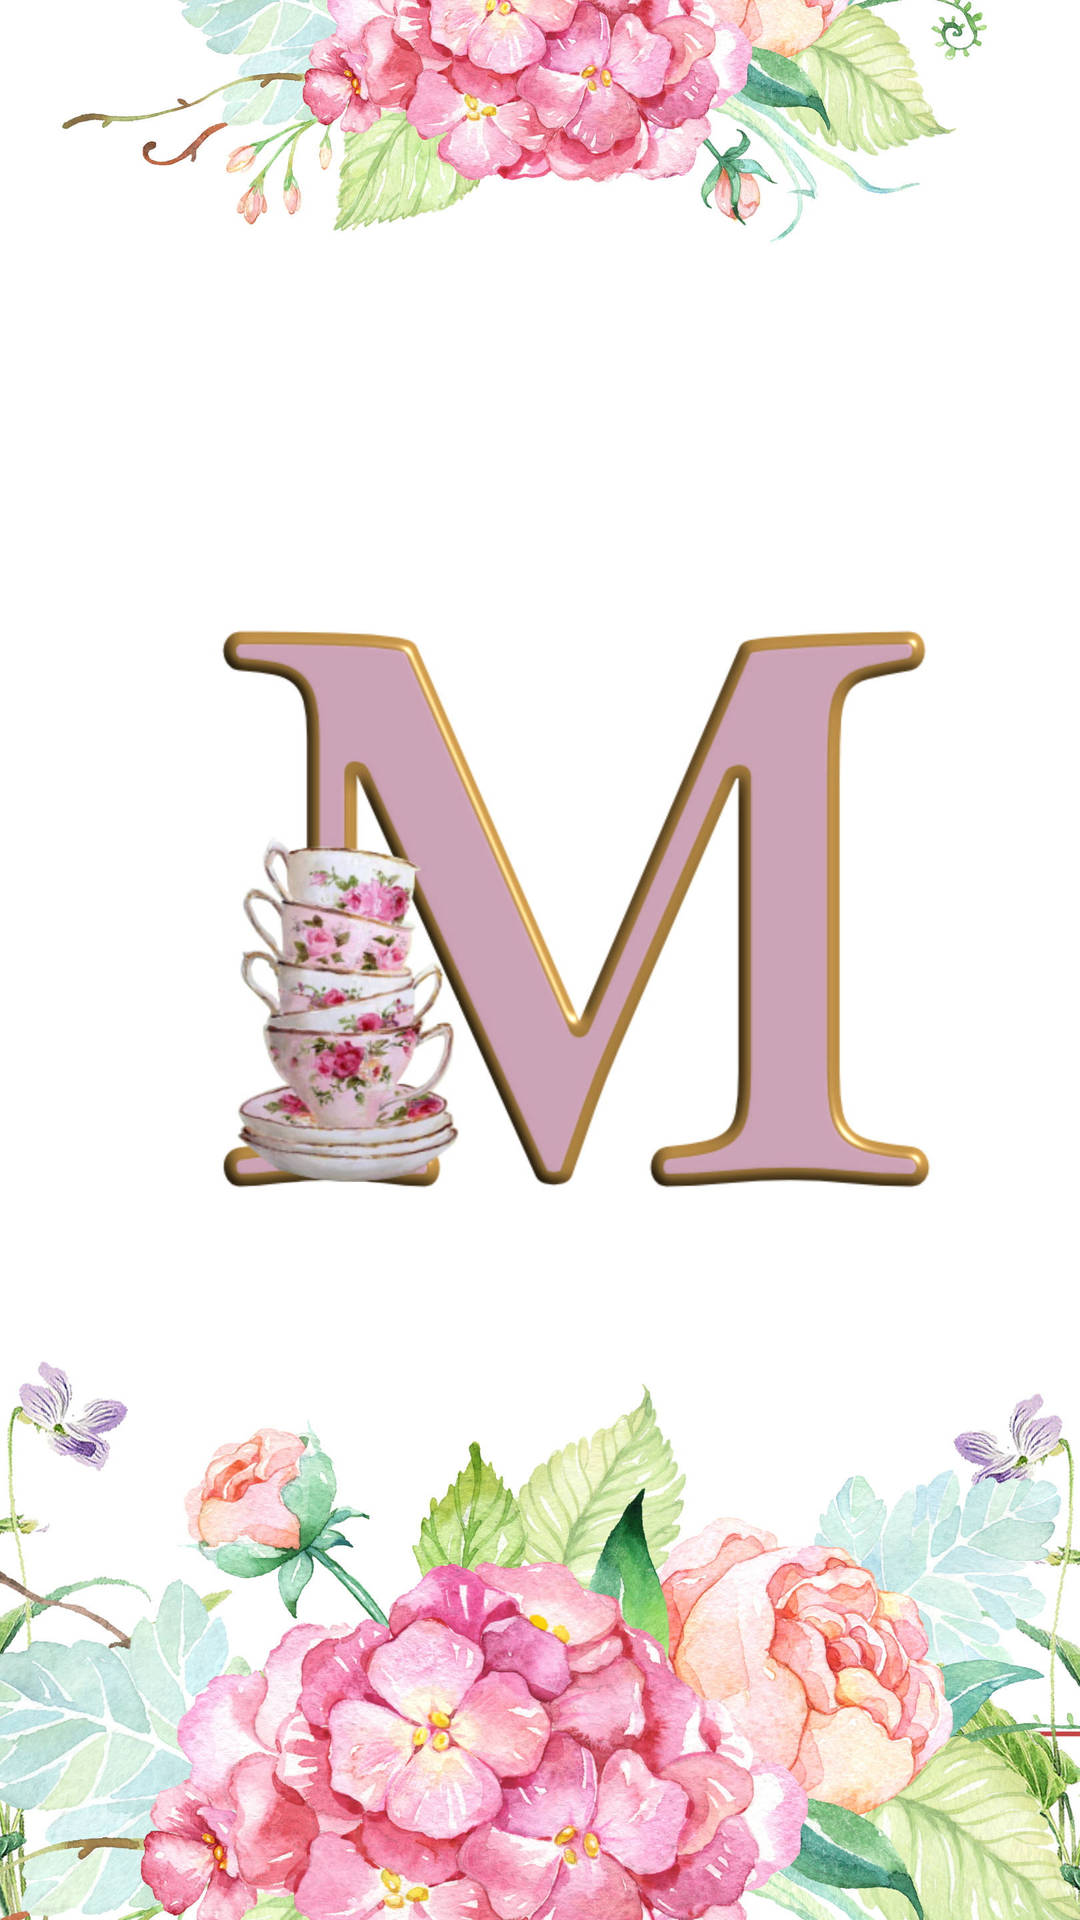 Marvelous M - Beautifully Arranged Letter M Designed with Tea Cups Wallpaper